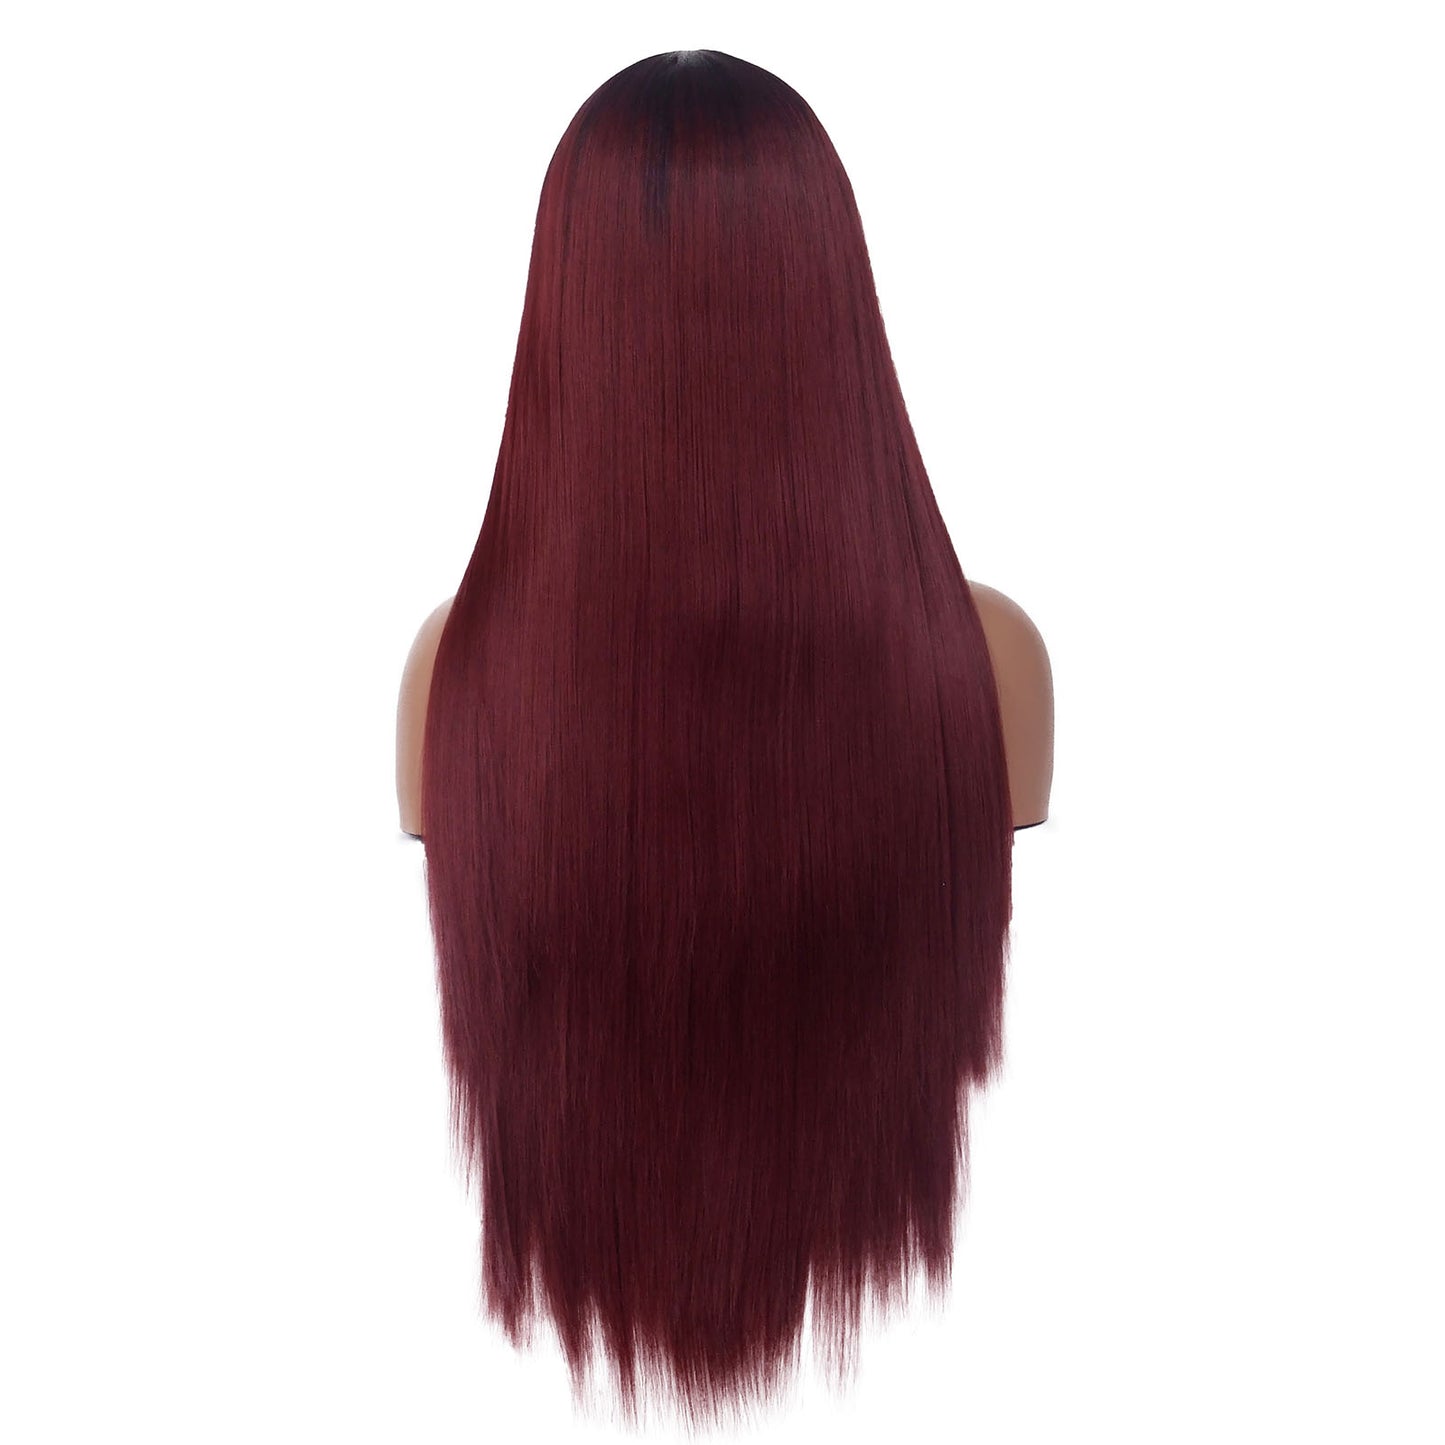 LINGDORA Long Straight Wine Red Wig Synthetic Hair